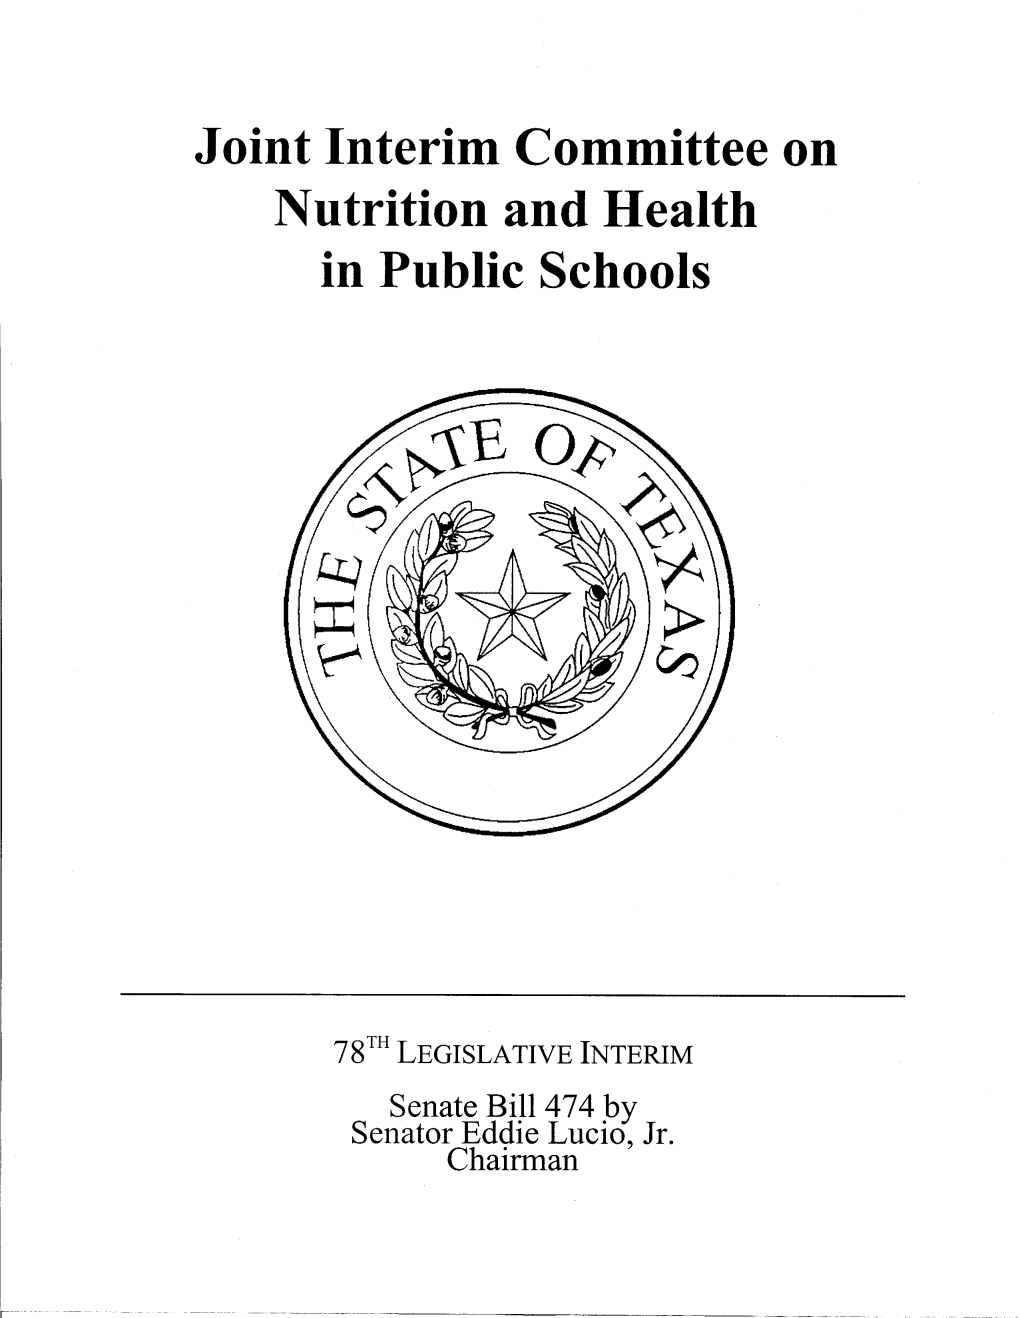 Joint Committee on Nutrition & Health in Public Schools Interim Report To